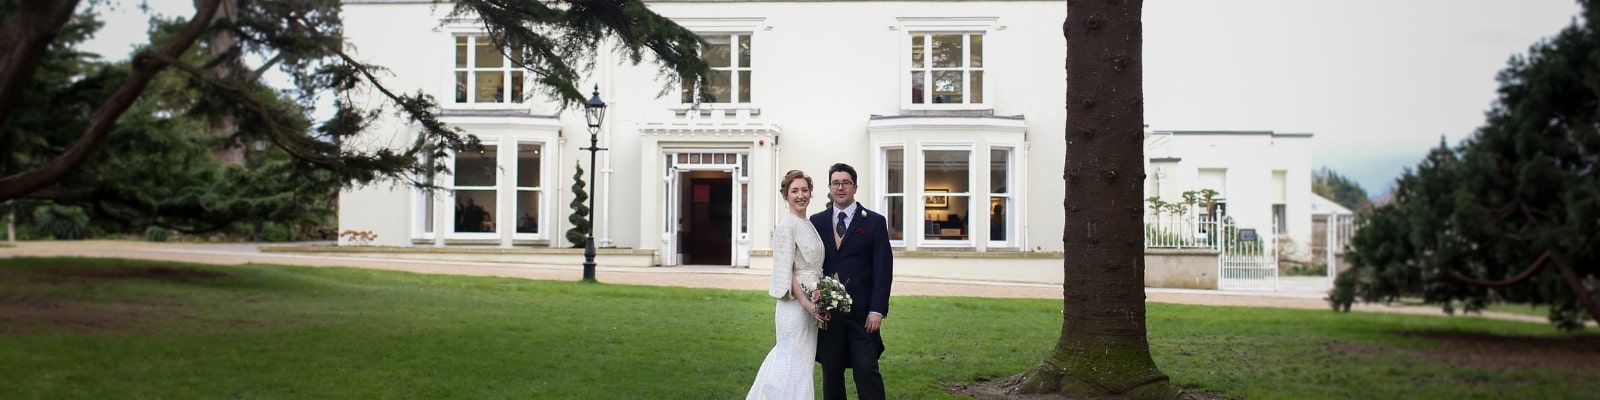 https://www.airfield.ie/wp-content/uploads/2019/02/Just-Married-Couple-at-Airfield-Estate-min.jpg